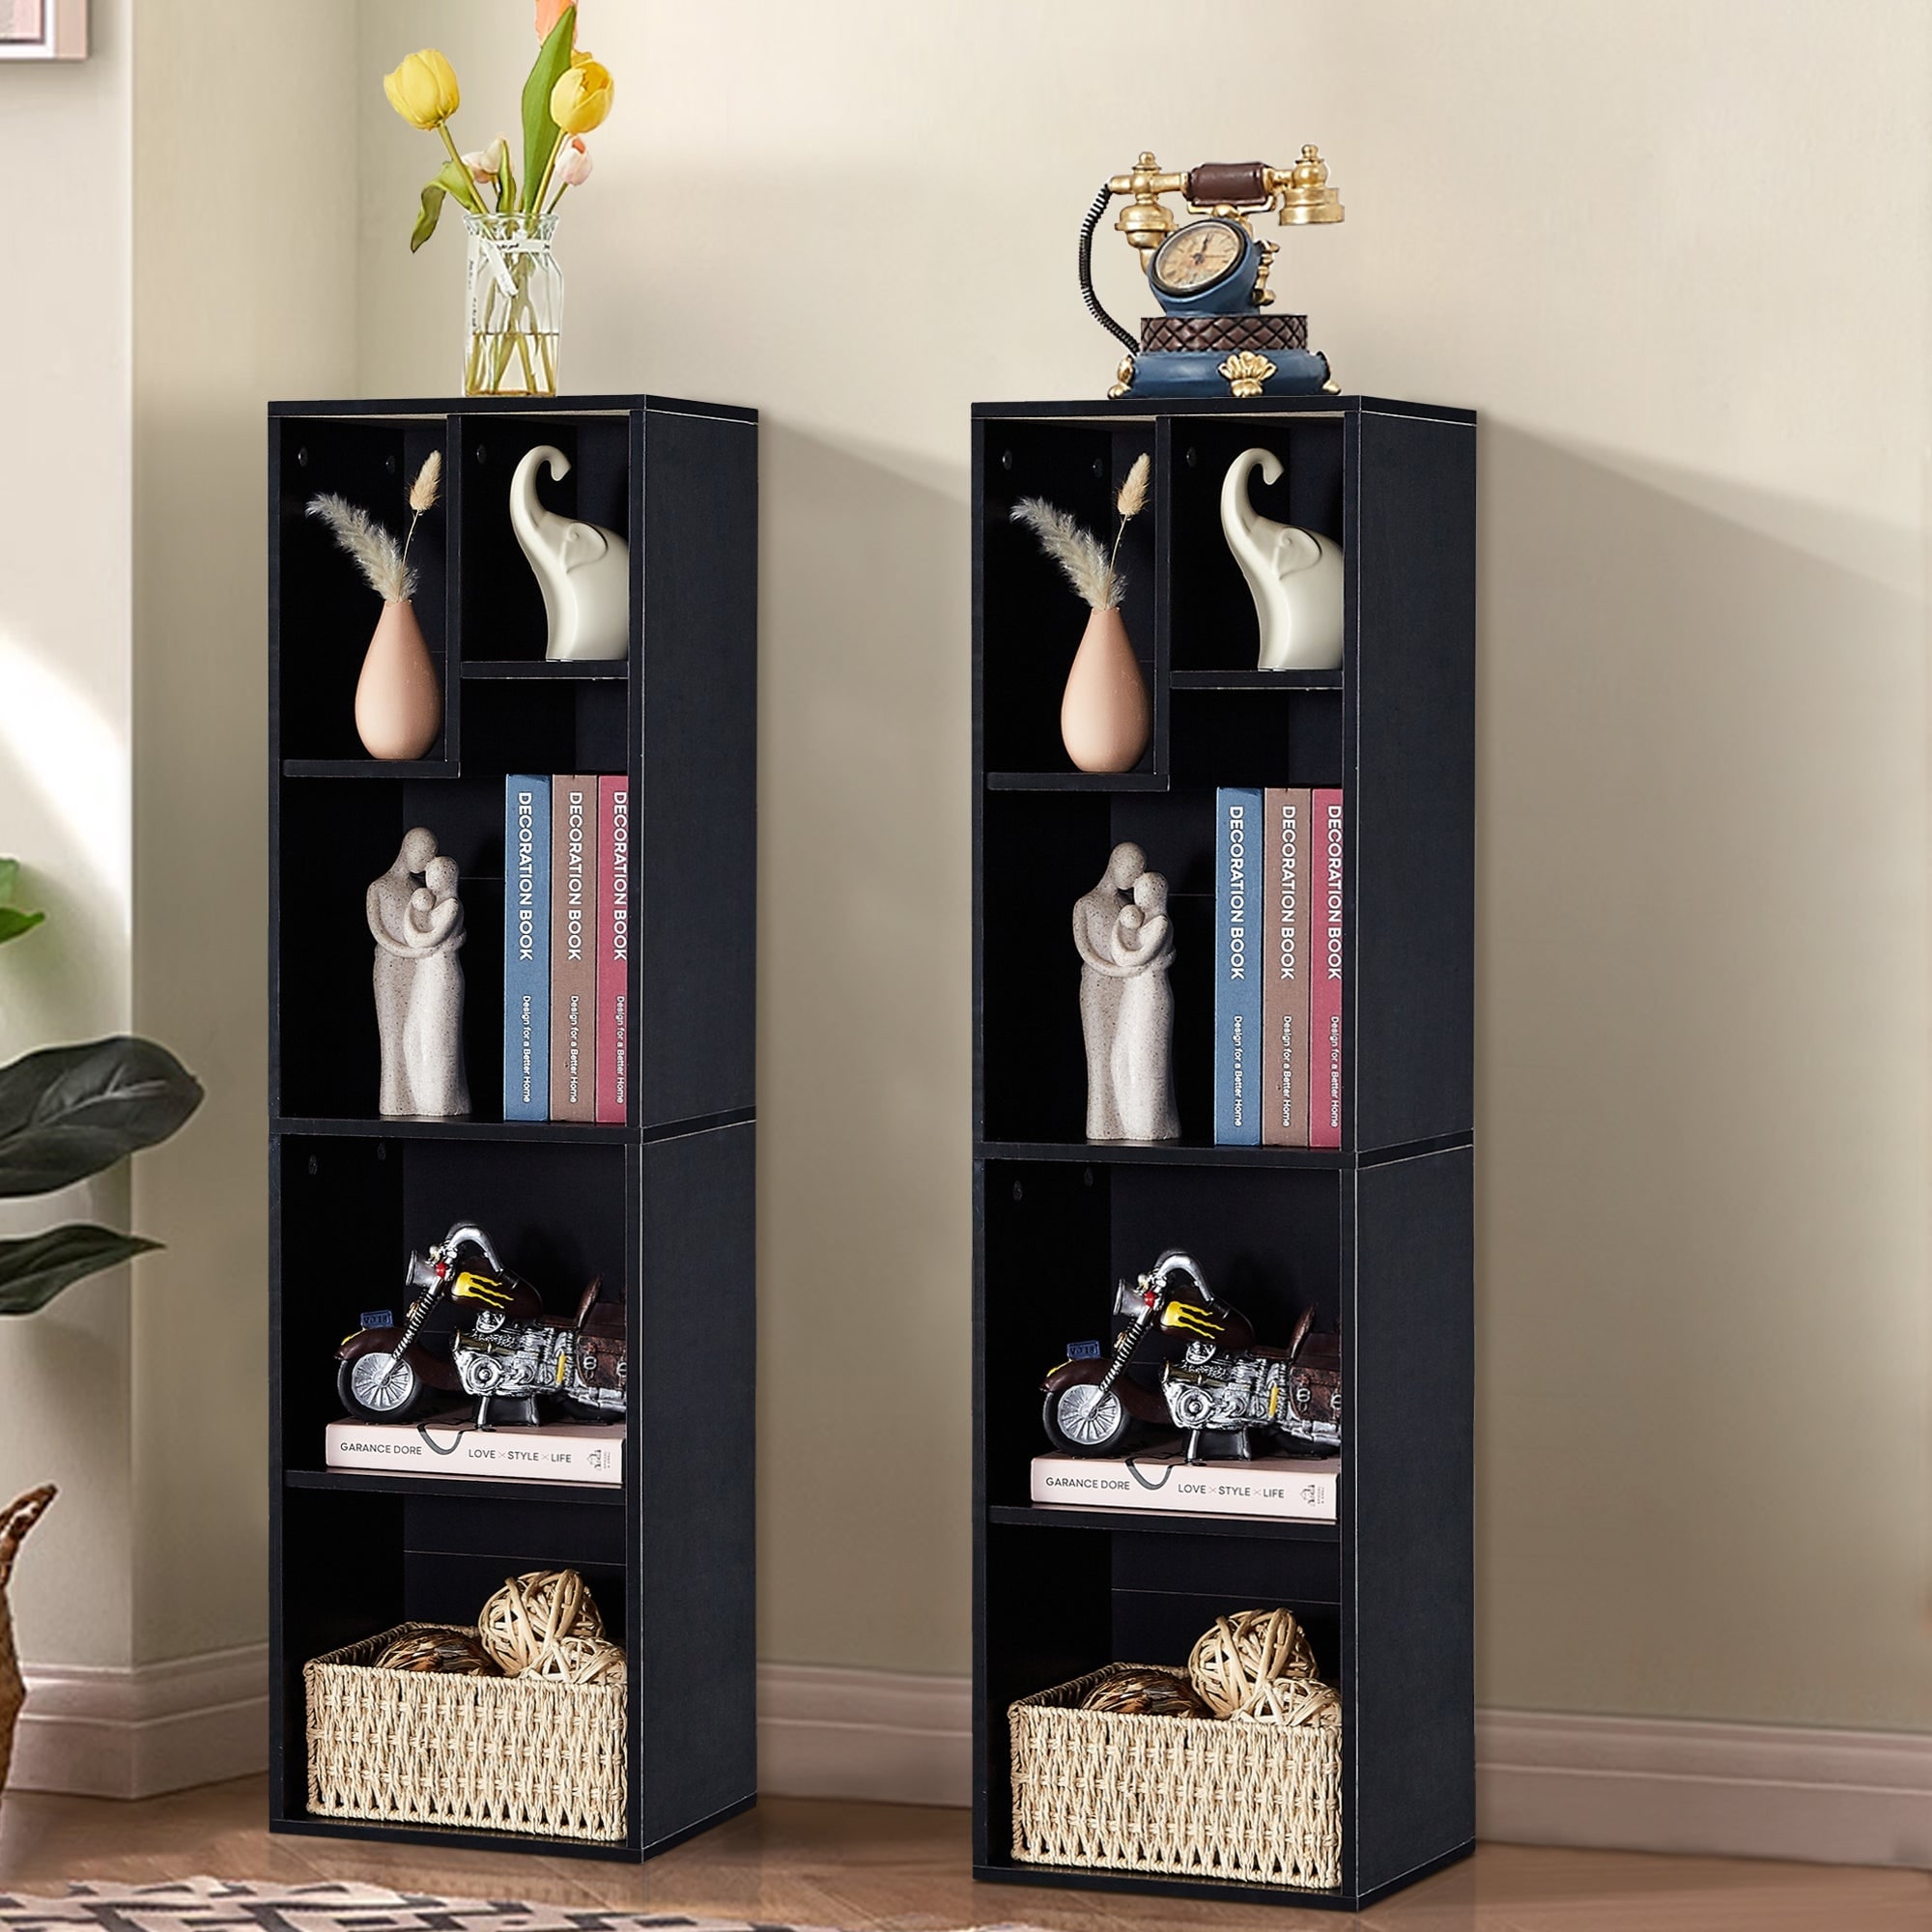 https://ak1.ostkcdn.com/images/products/is/images/direct/5a509f003fcd8b01709361bf442581a1744dbc17/5-Tier-Bookshelf%2C-Set-of-2-Tall-Bookcase-Shelf-Storage-Organizer%2C-Modern-Book-Shelf-for-Bedroom%2C-Living-Room-and-Home-Office.jpg